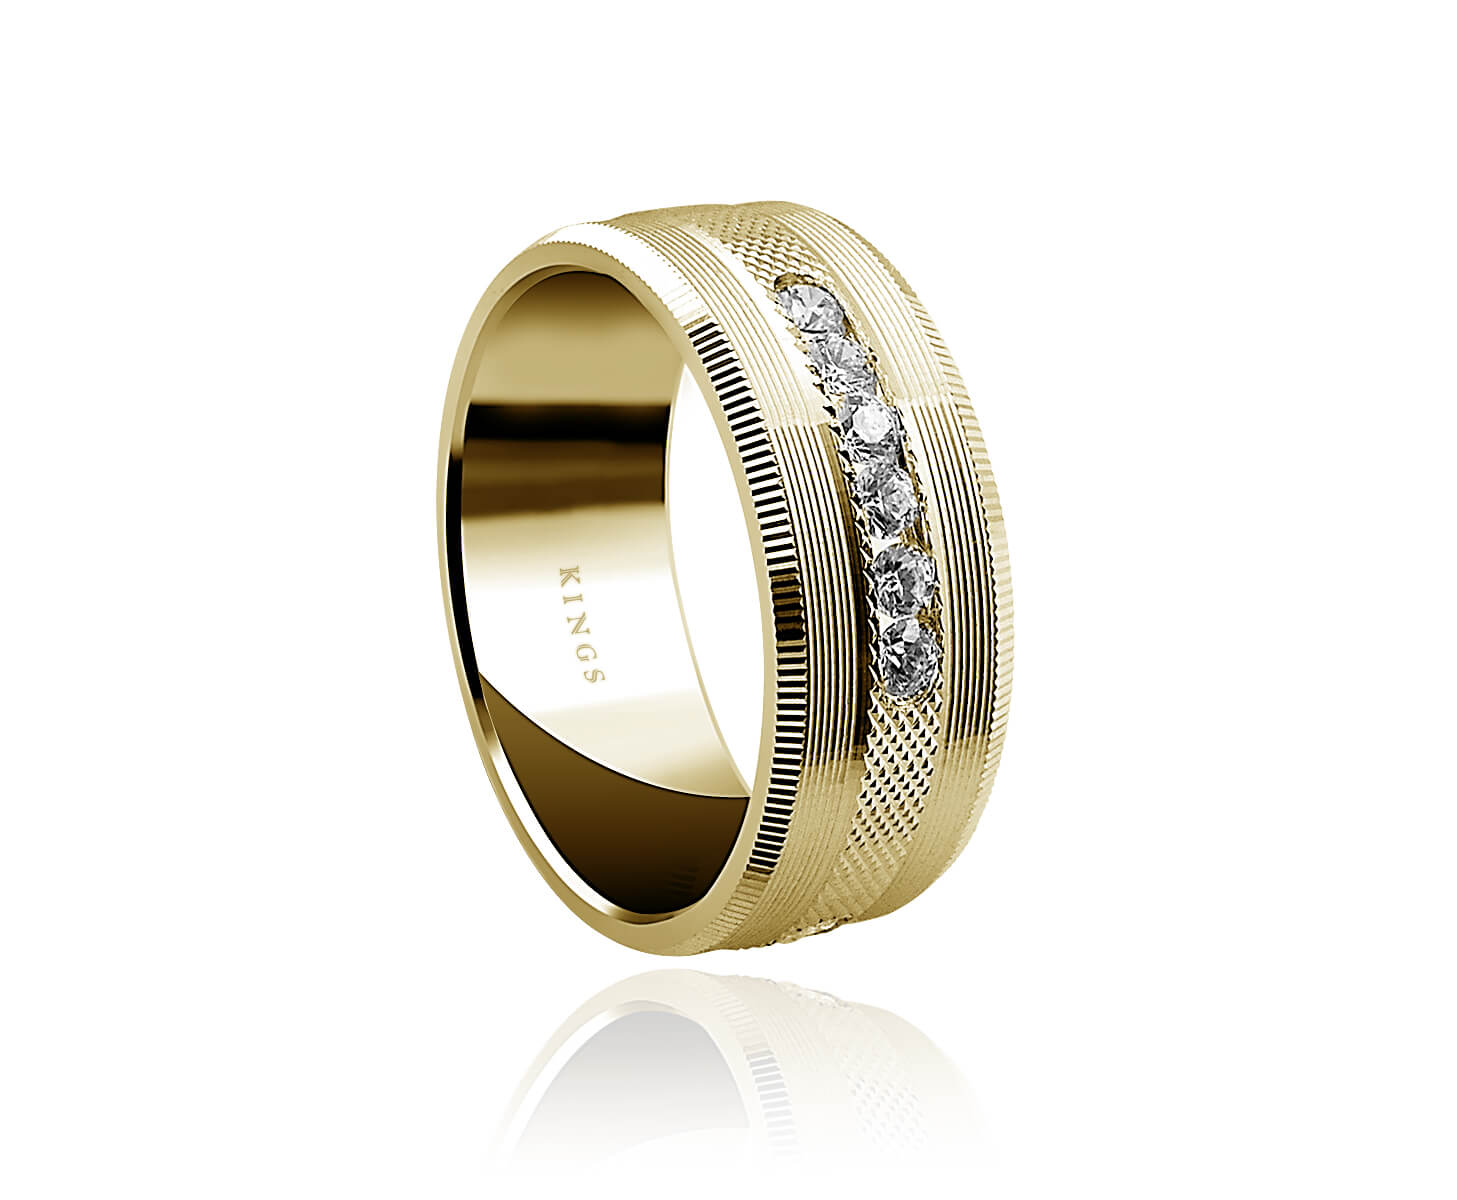 Designer Men's Diamond Ring 8.50mm Textured Yellow Gold Ring with approximately 0.9 carat of brilliant cut diamonds